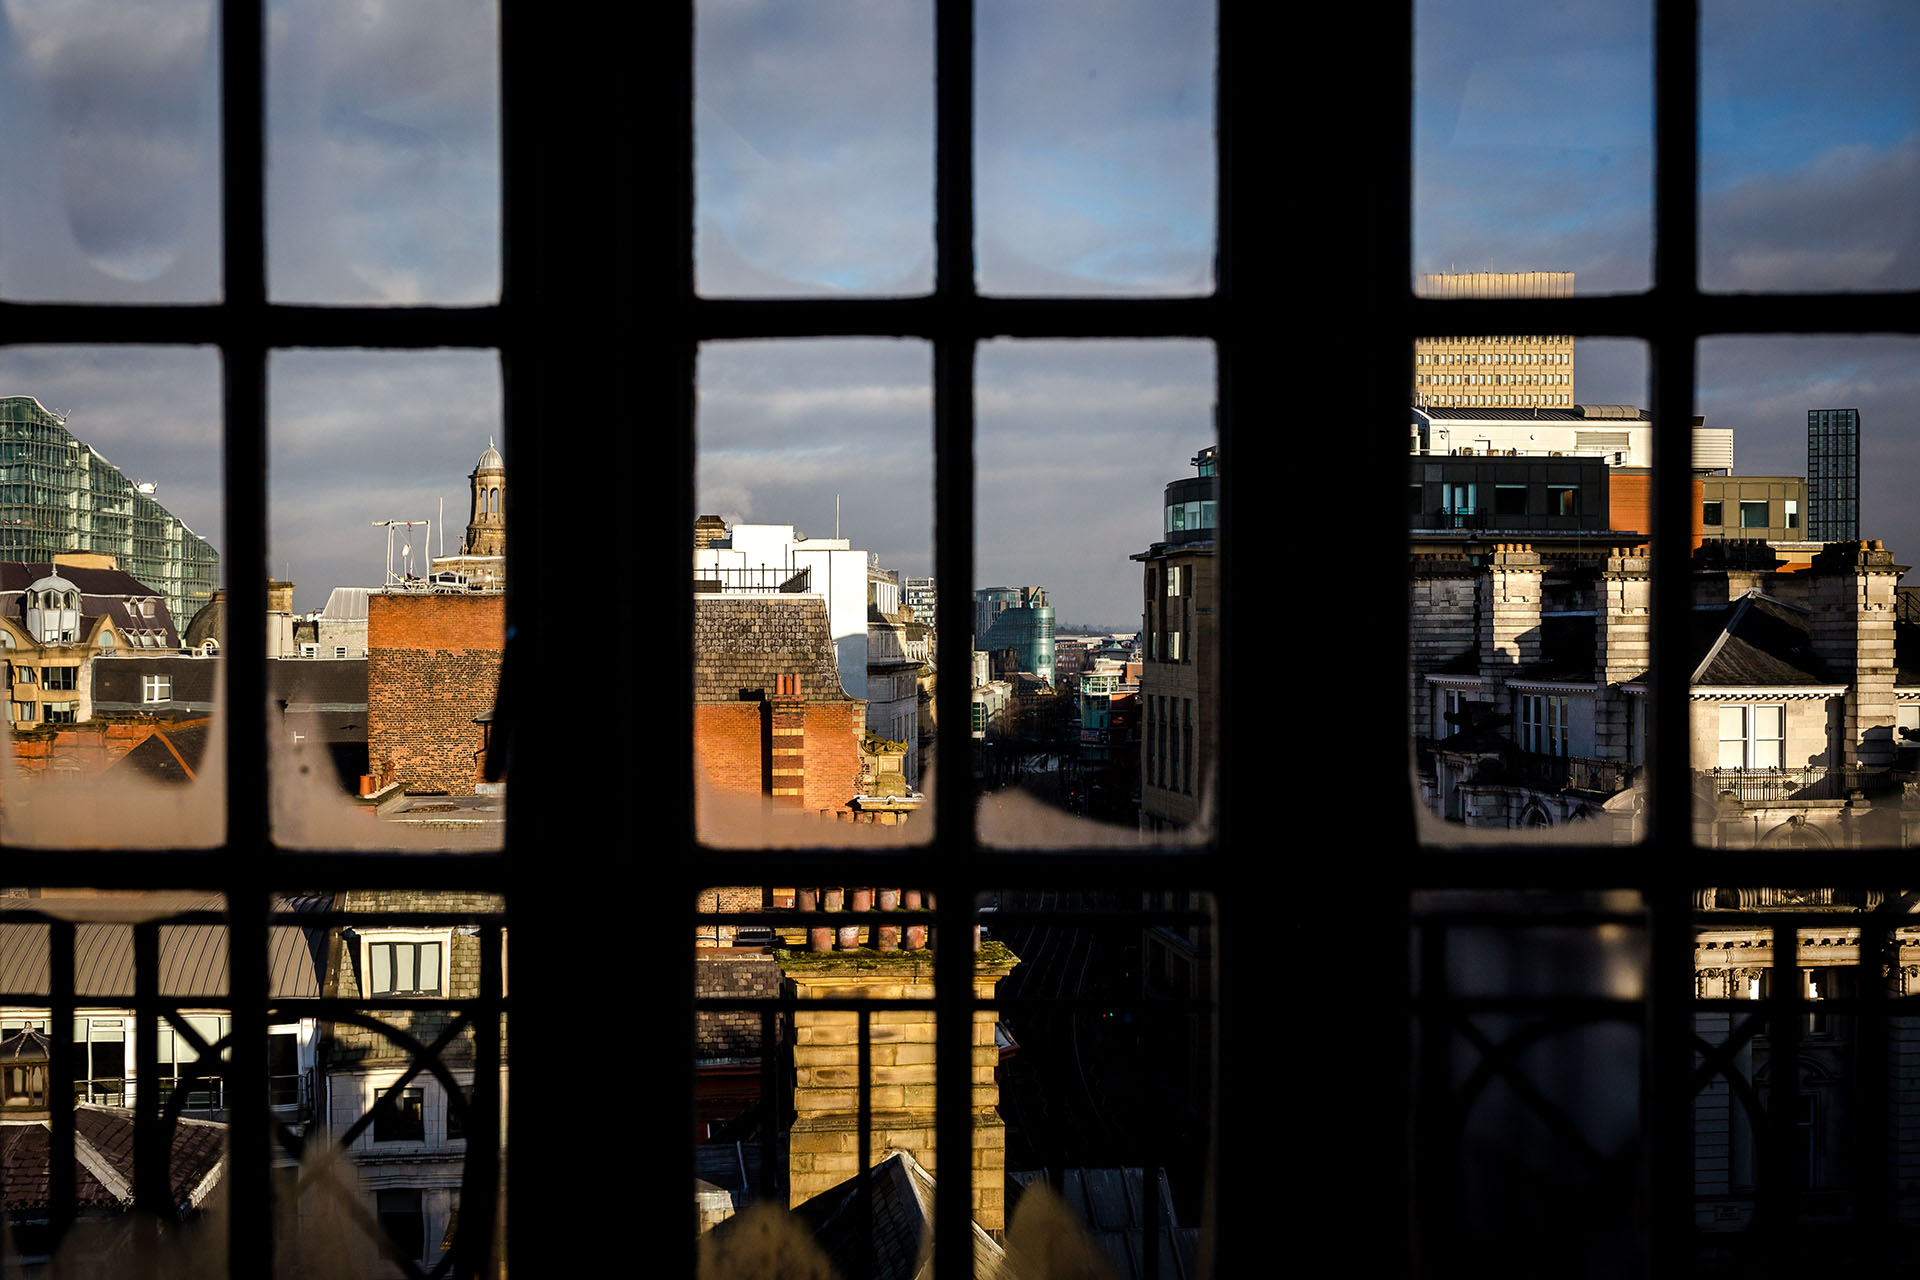 image looking out of a window overlooking a city skyline